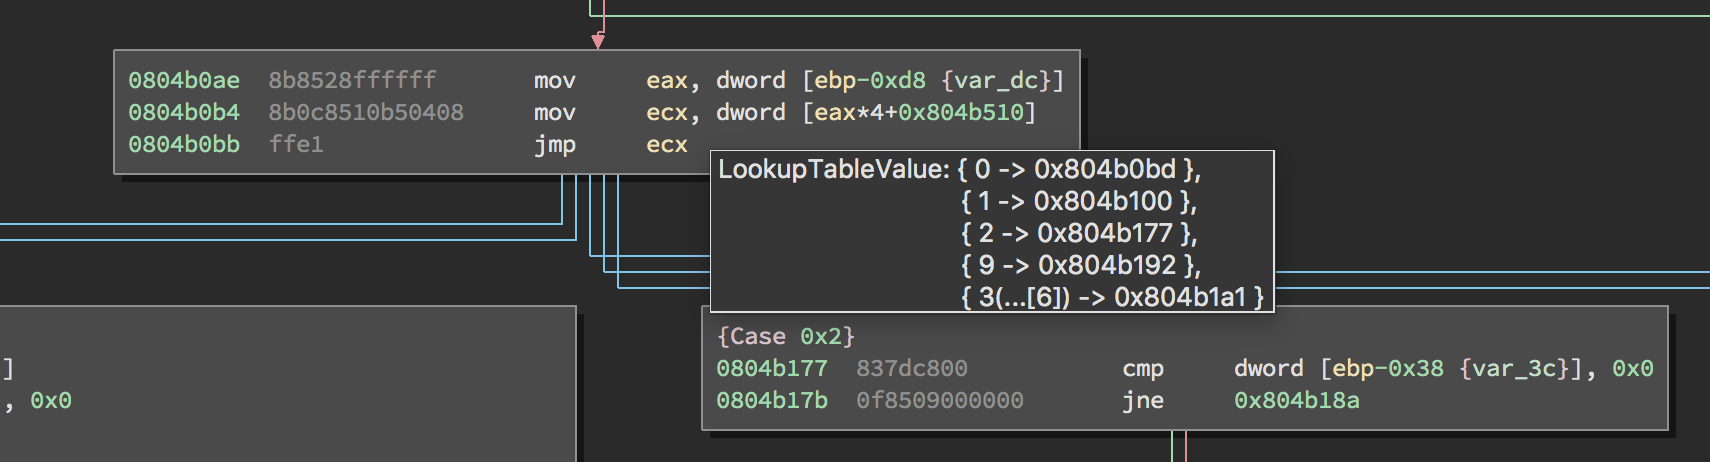 Table Value on Hover